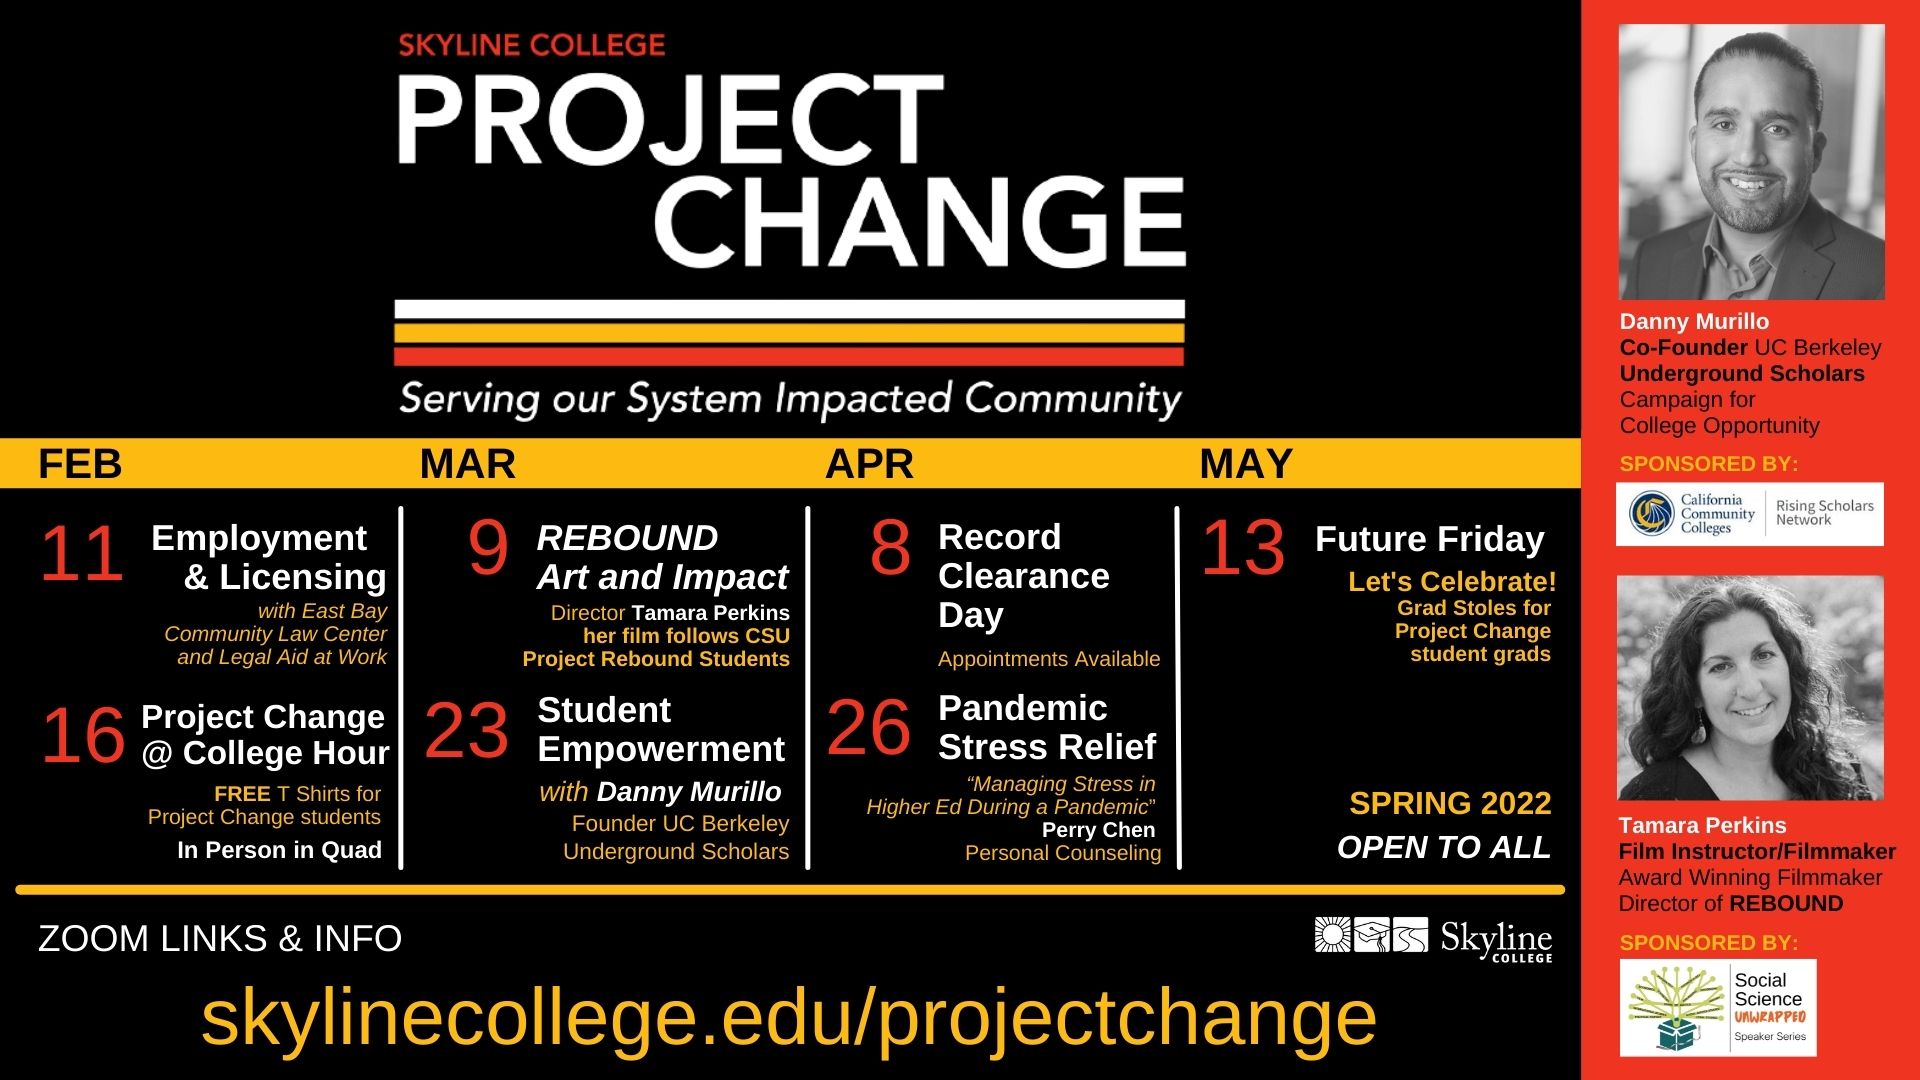 Spring 2022 @ Project Change